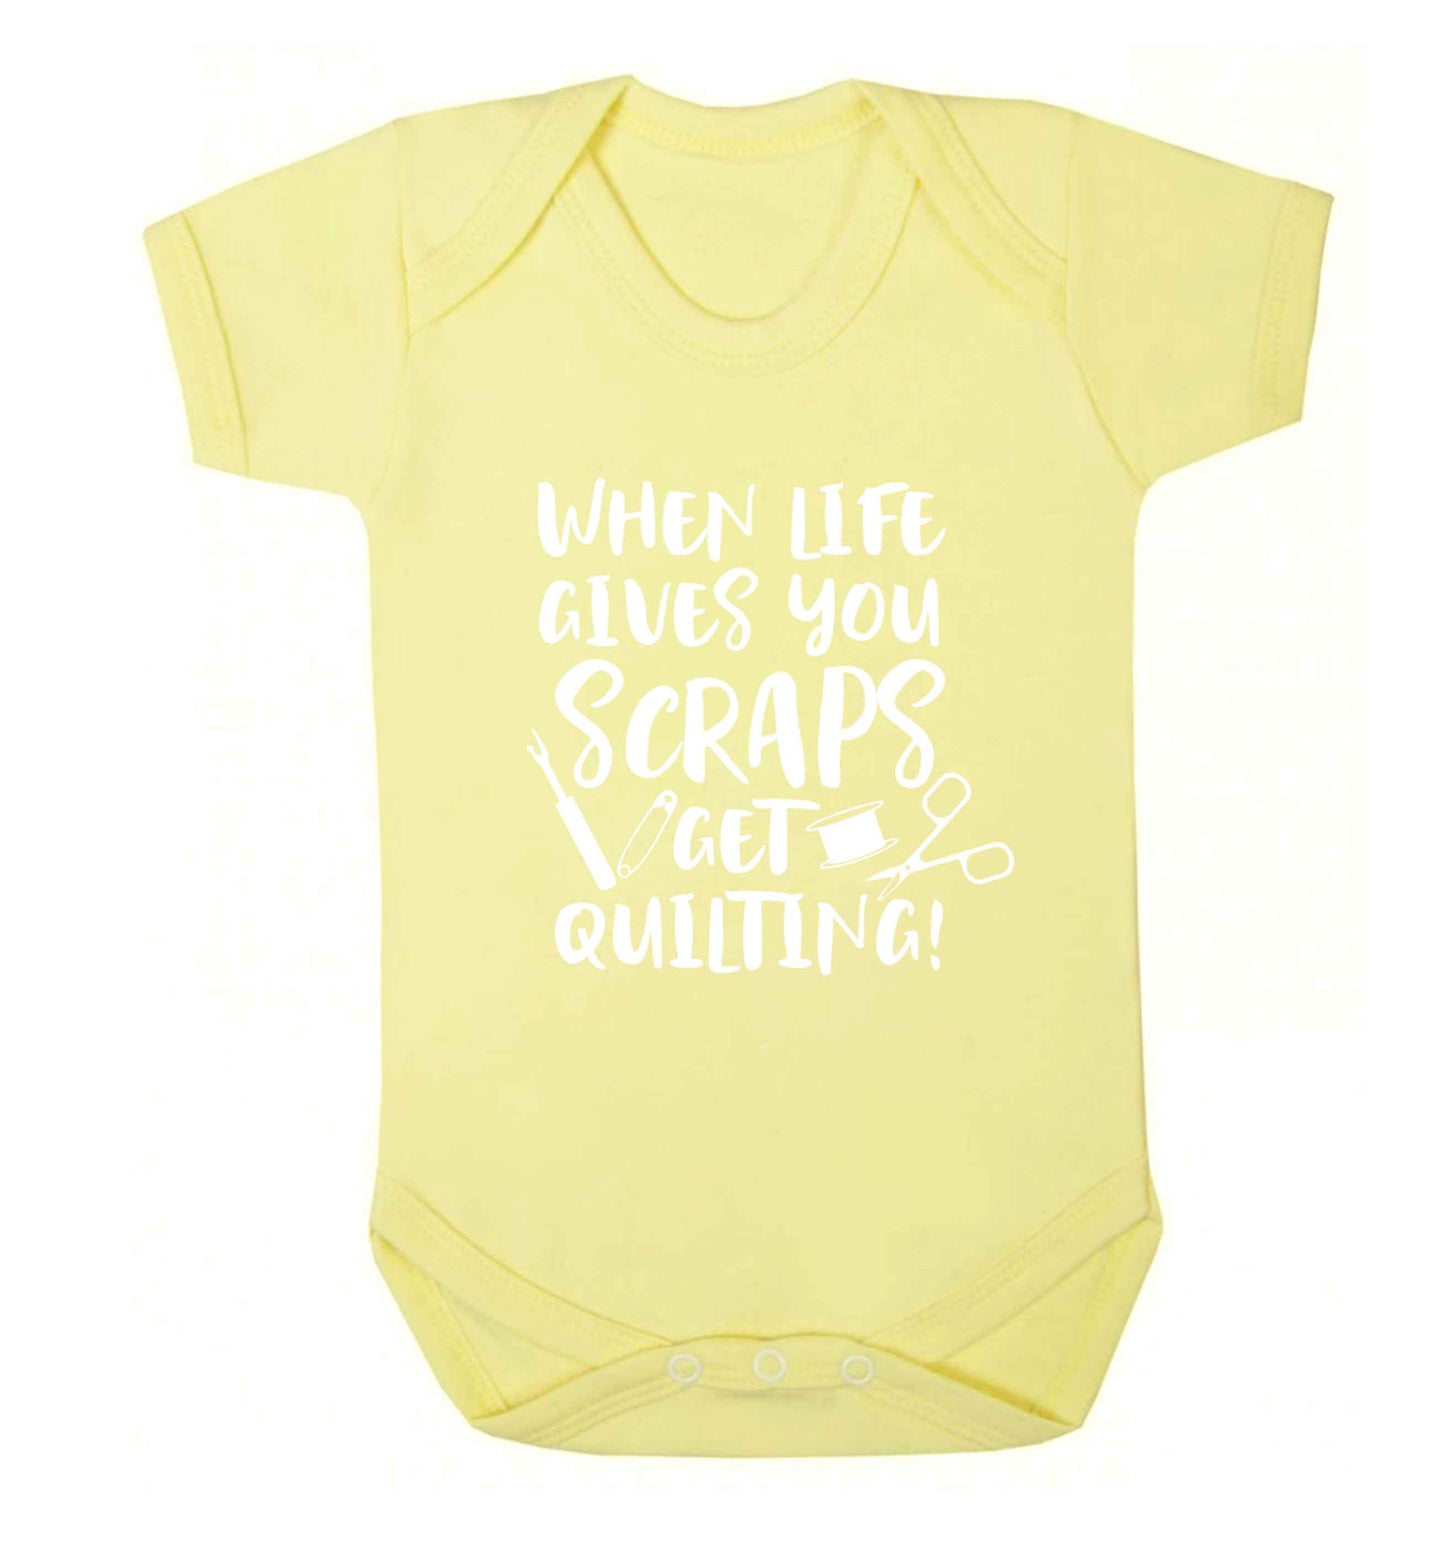 When life gives you scraps get quilting! Baby Vest pale yellow 18-24 months